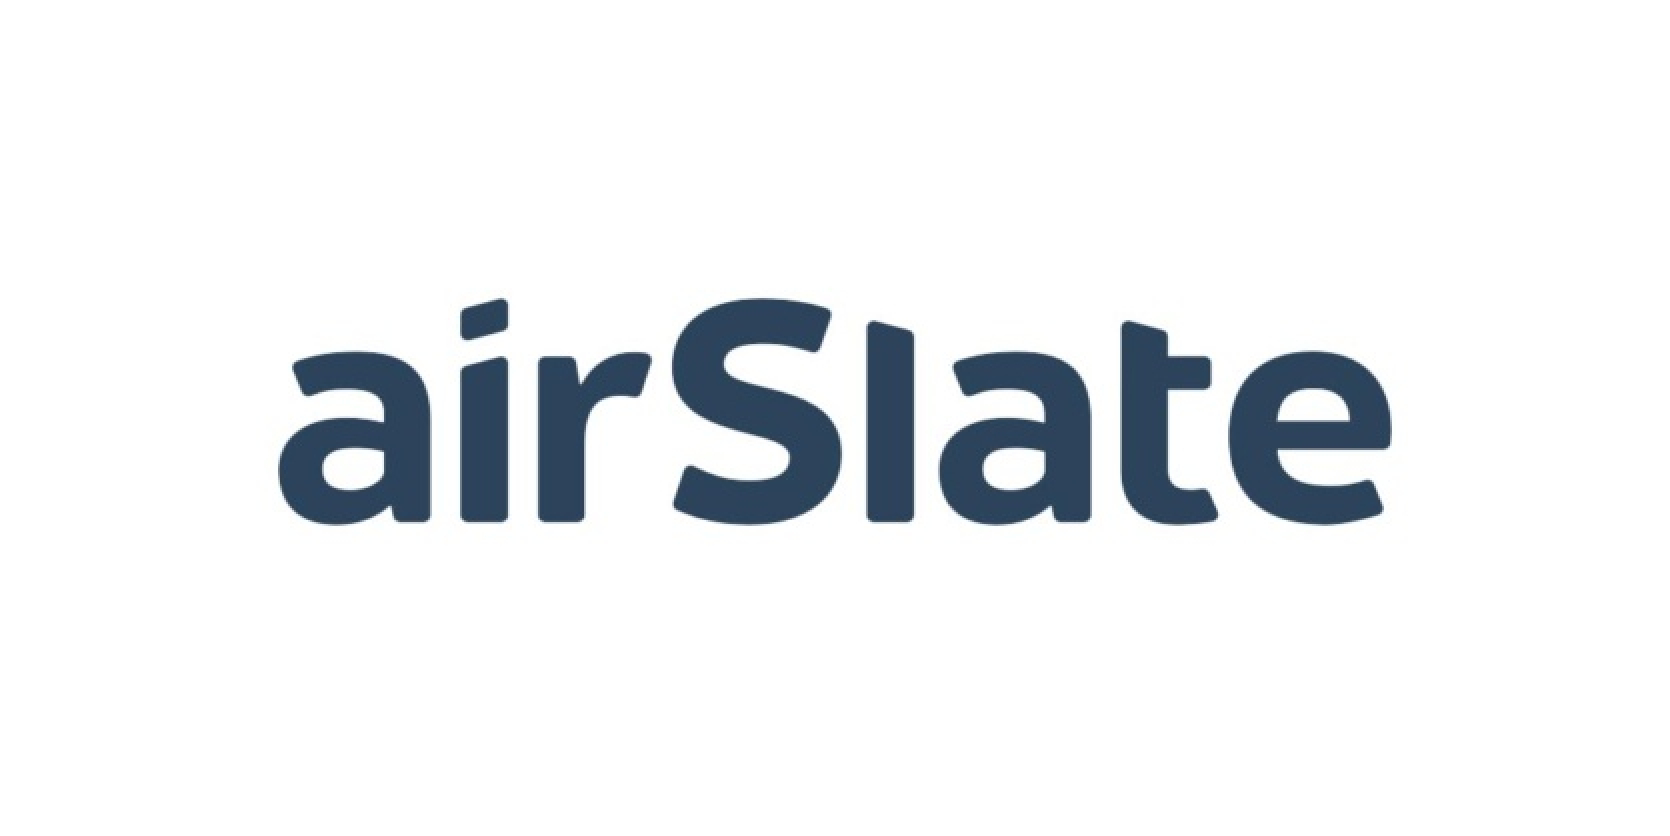 Product company AirSlate is undergoing another wave of layoffs - firing those who have been mobilized